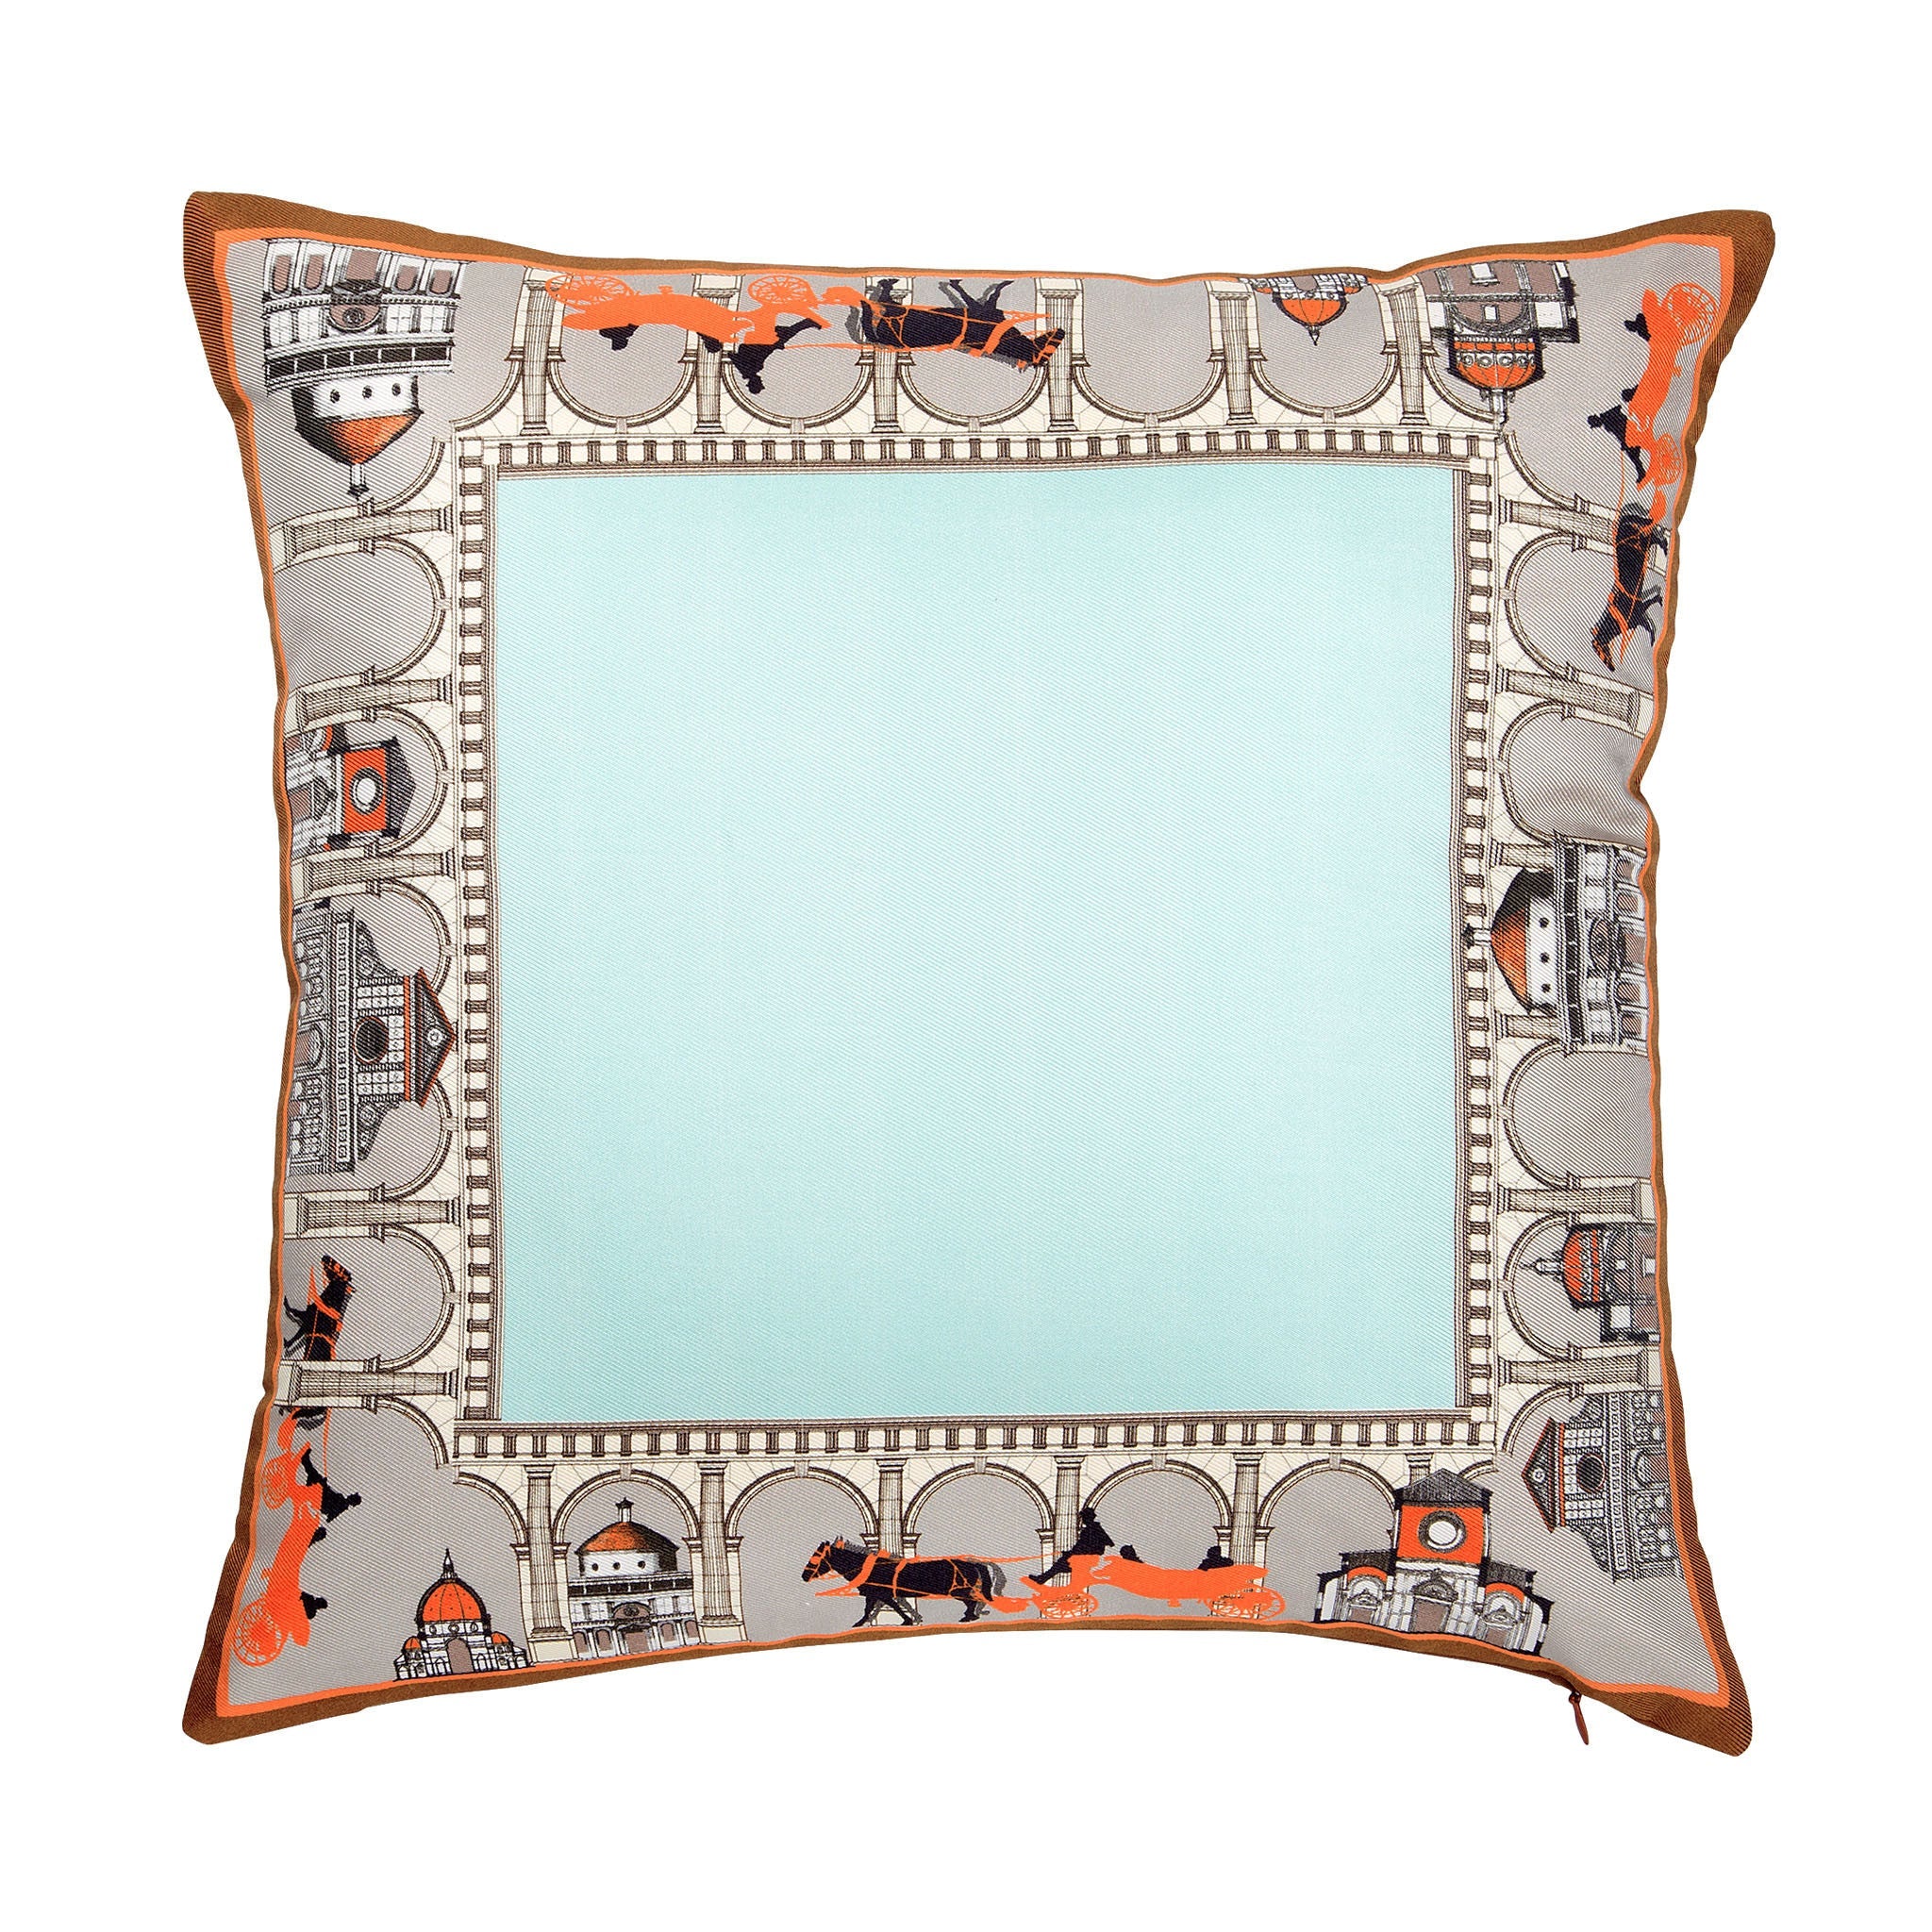 Bivain_-_C024_Horse_Carriage_-_Silk_twill_and_faux_leather_architectural-print_cushion_front.jpg